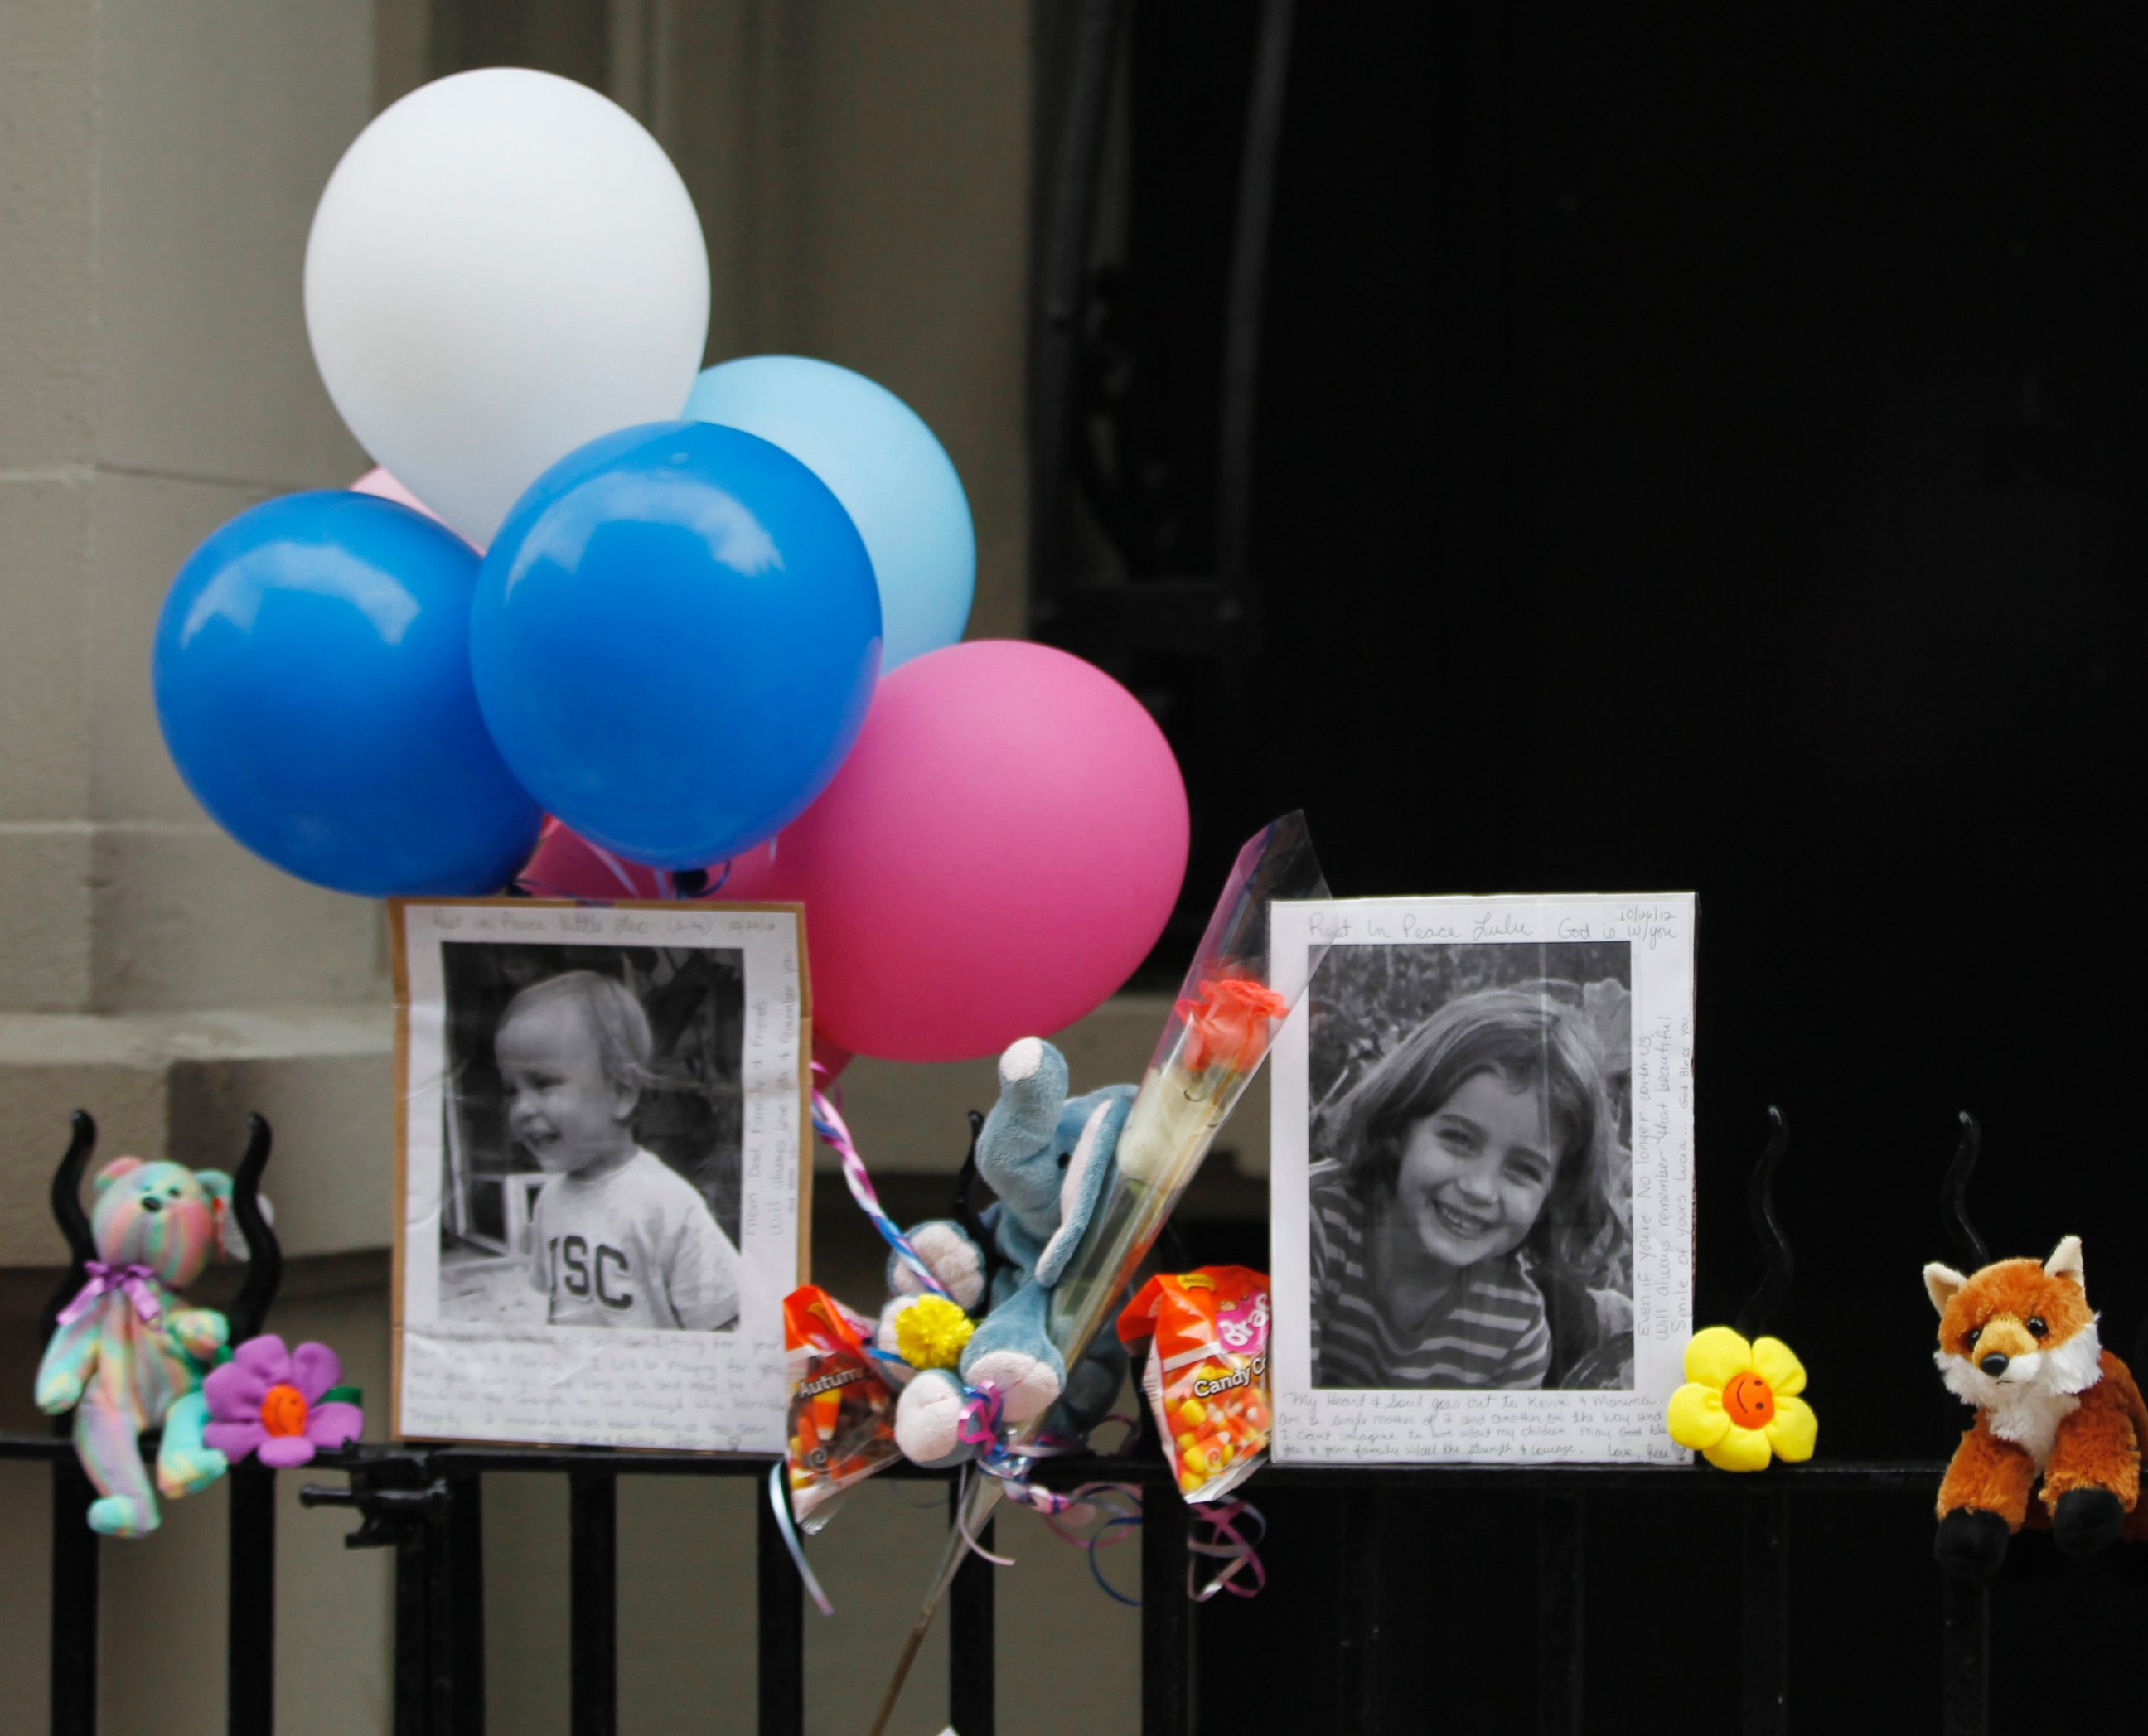 PHOTO: Photographs of six-year-old Lucia Krim and her 2-year-old brother, Leo, are displayed alongside balloons and stuffed animals at a memorial outside the apartment building were they lived in New York, Oct. 27, 2012.